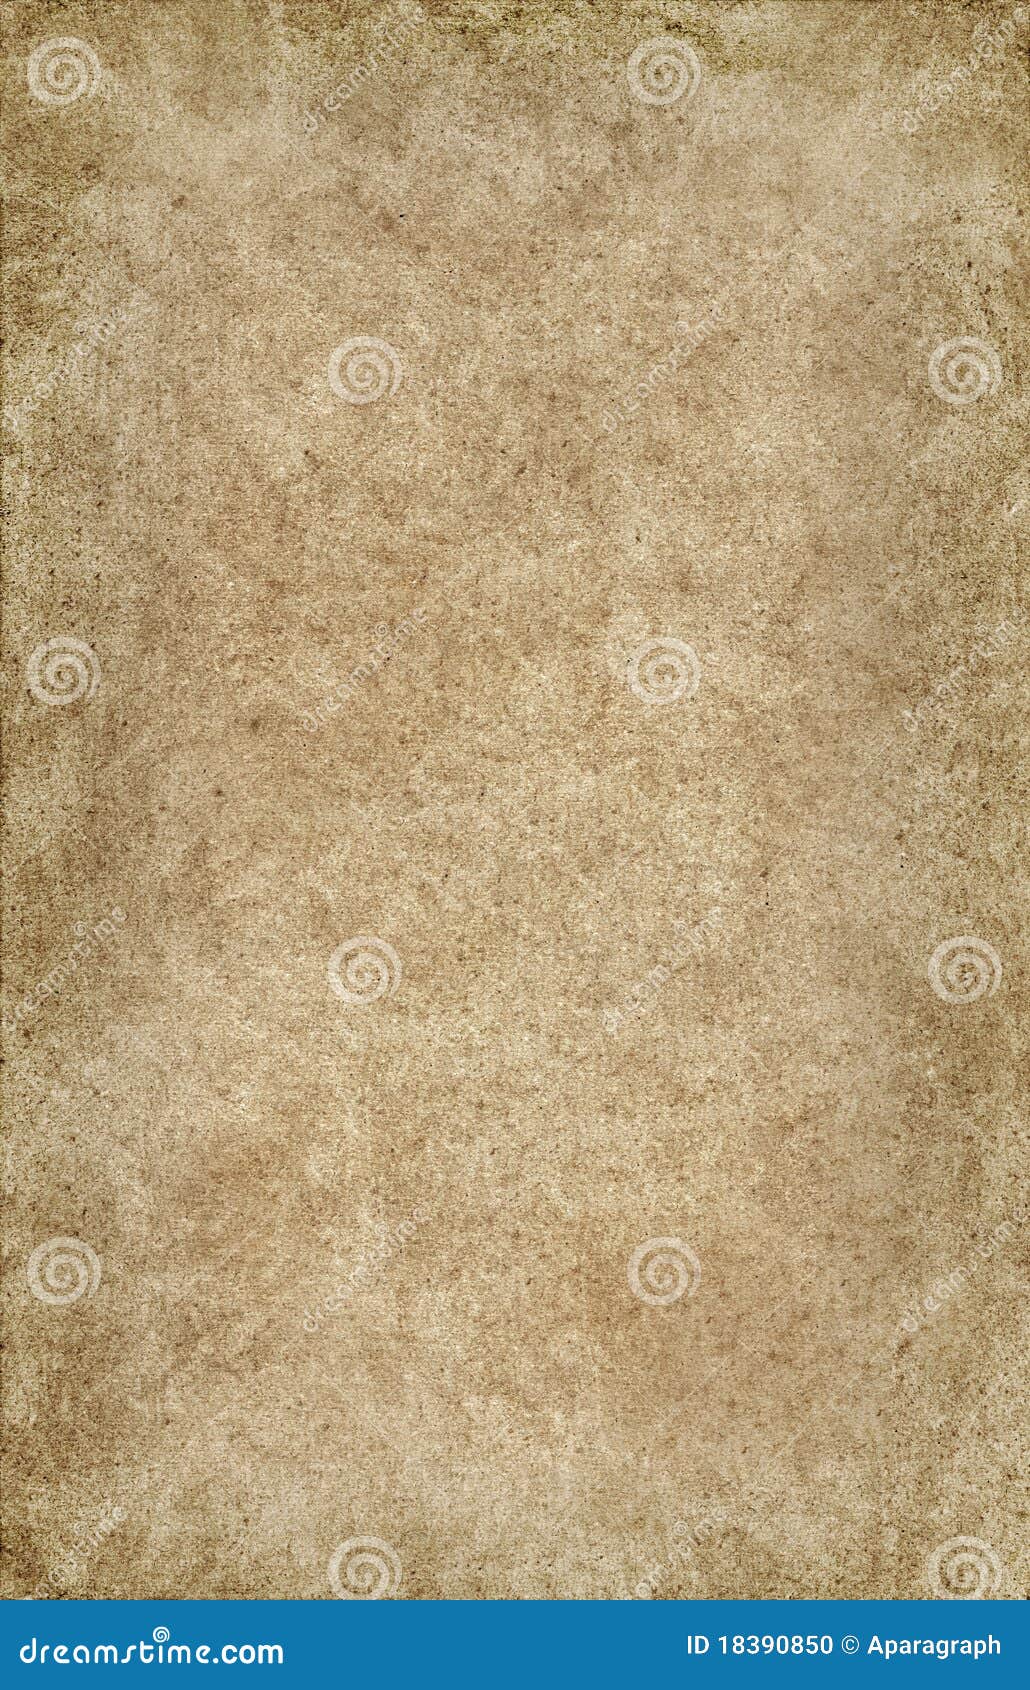 Old Vintage Paper Book Texture Grunge Background Stock Photo, Picture and  Royalty Free Image. Image 60165723.